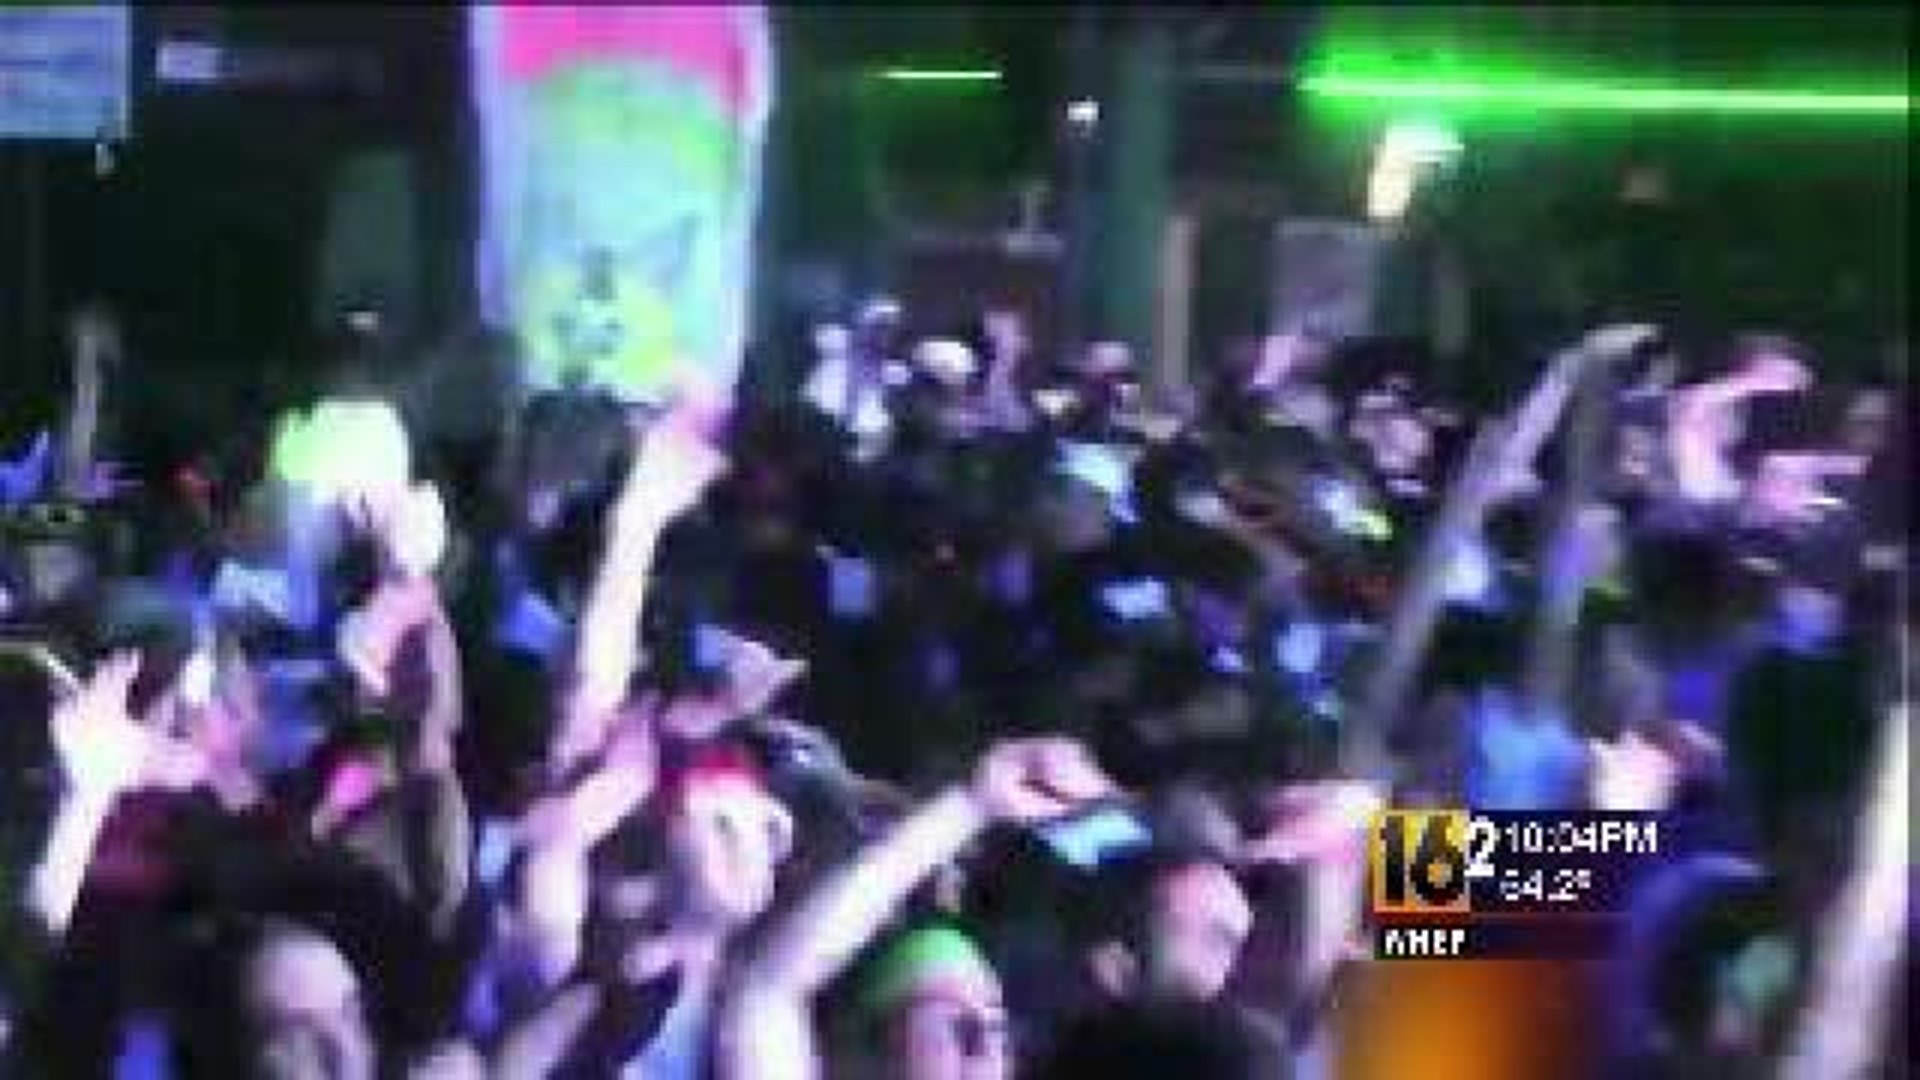 Police: Several "Molly" Overdoses After Dance Party In Poconos